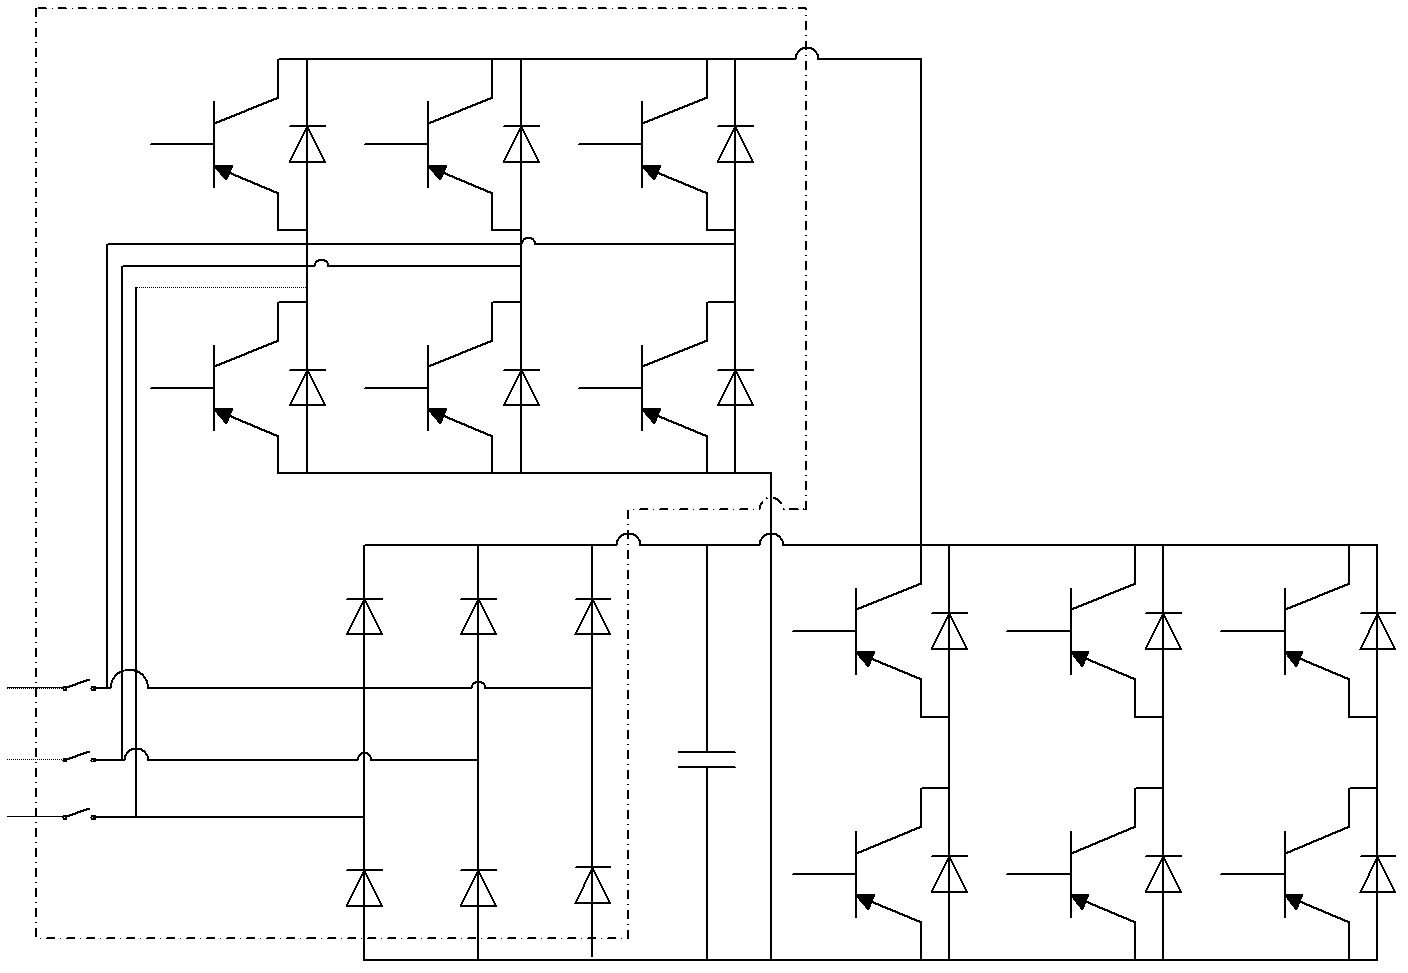 Two-way four-quadrant frequency converter